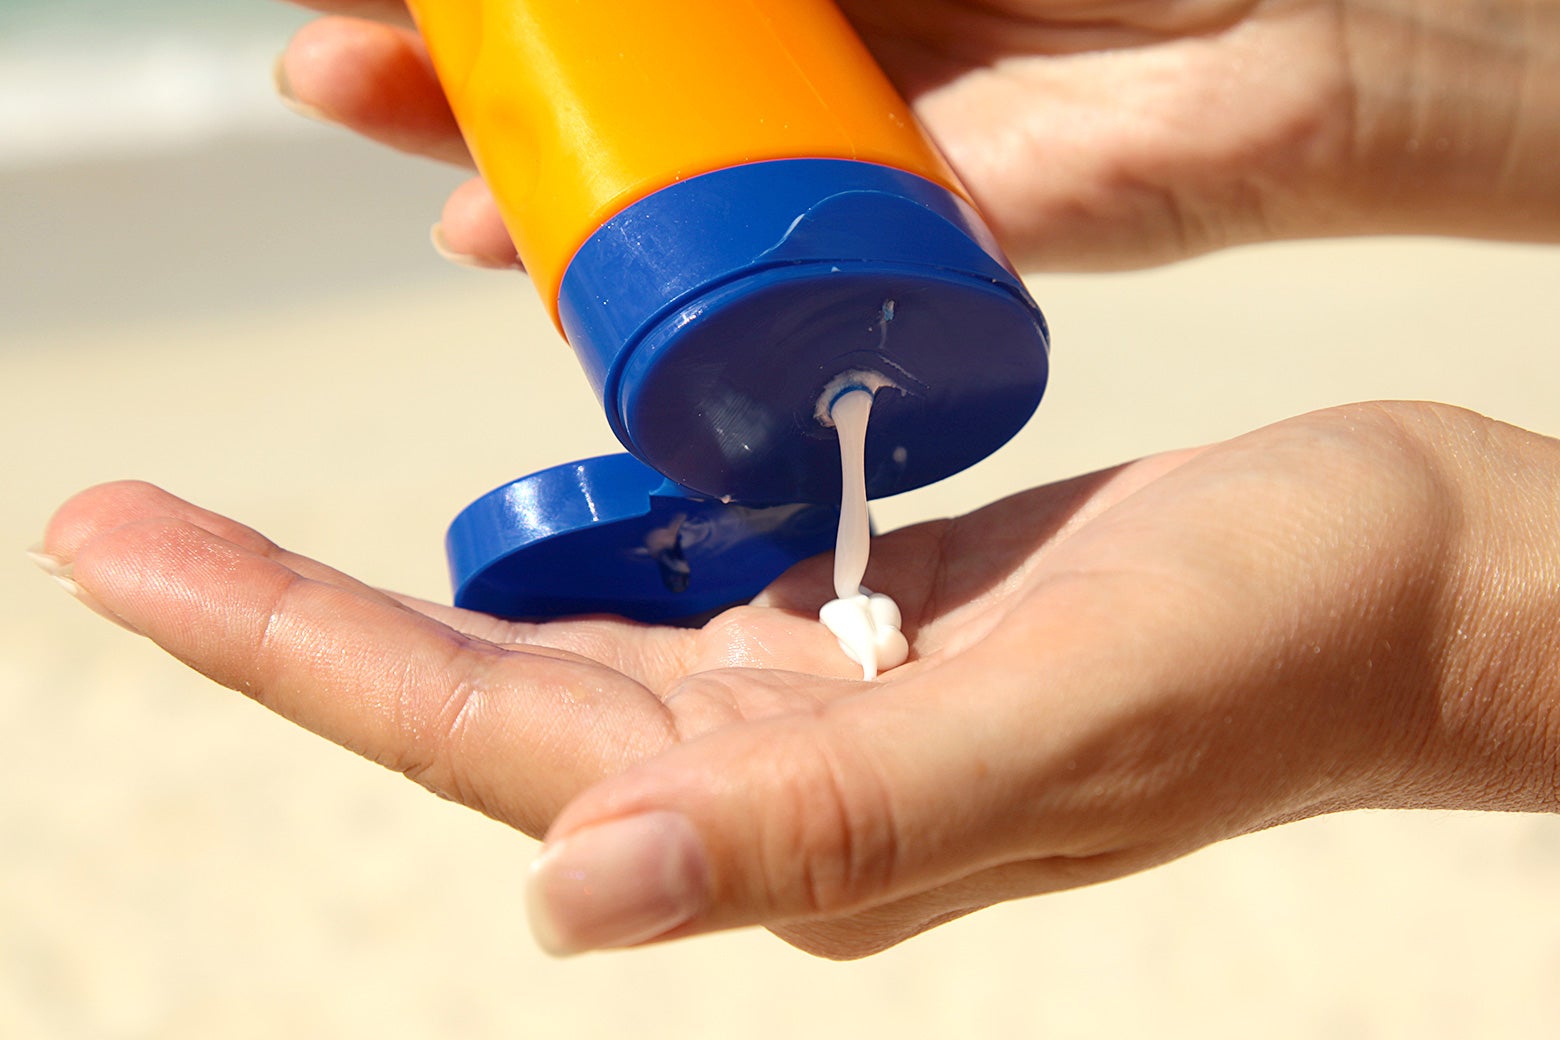 A woman squeezing sunscreen into her hand.